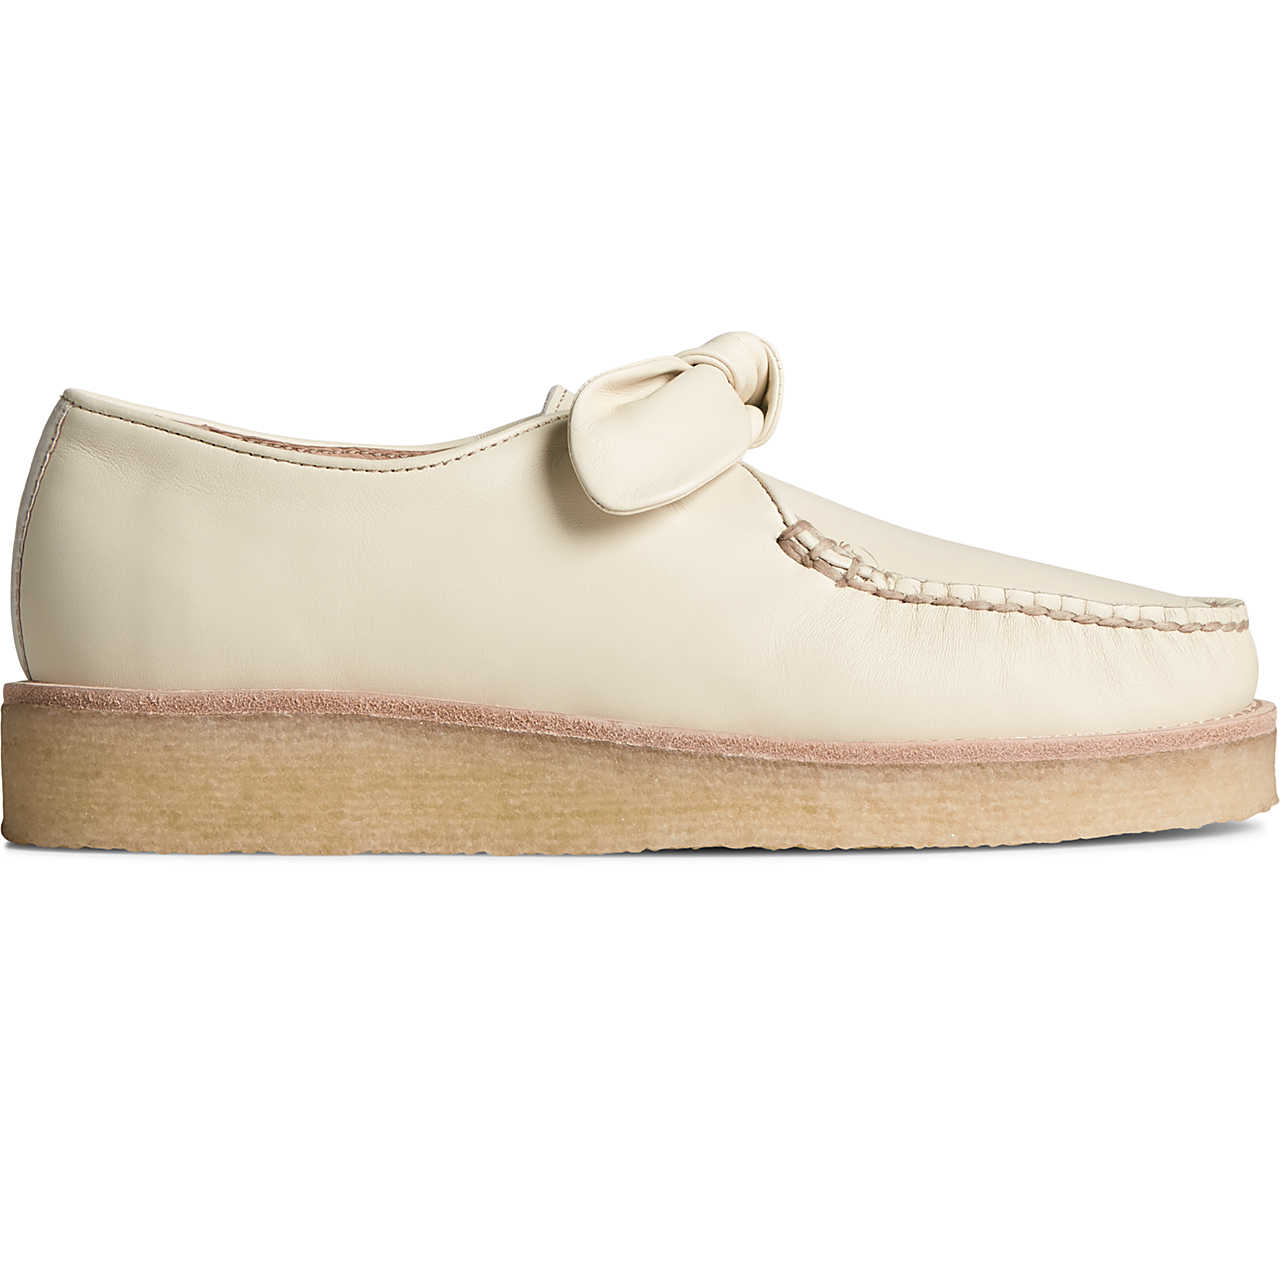 Shop All Flats, Slip On, Heels & Loafers for Women | Sperry Top-Sider ...